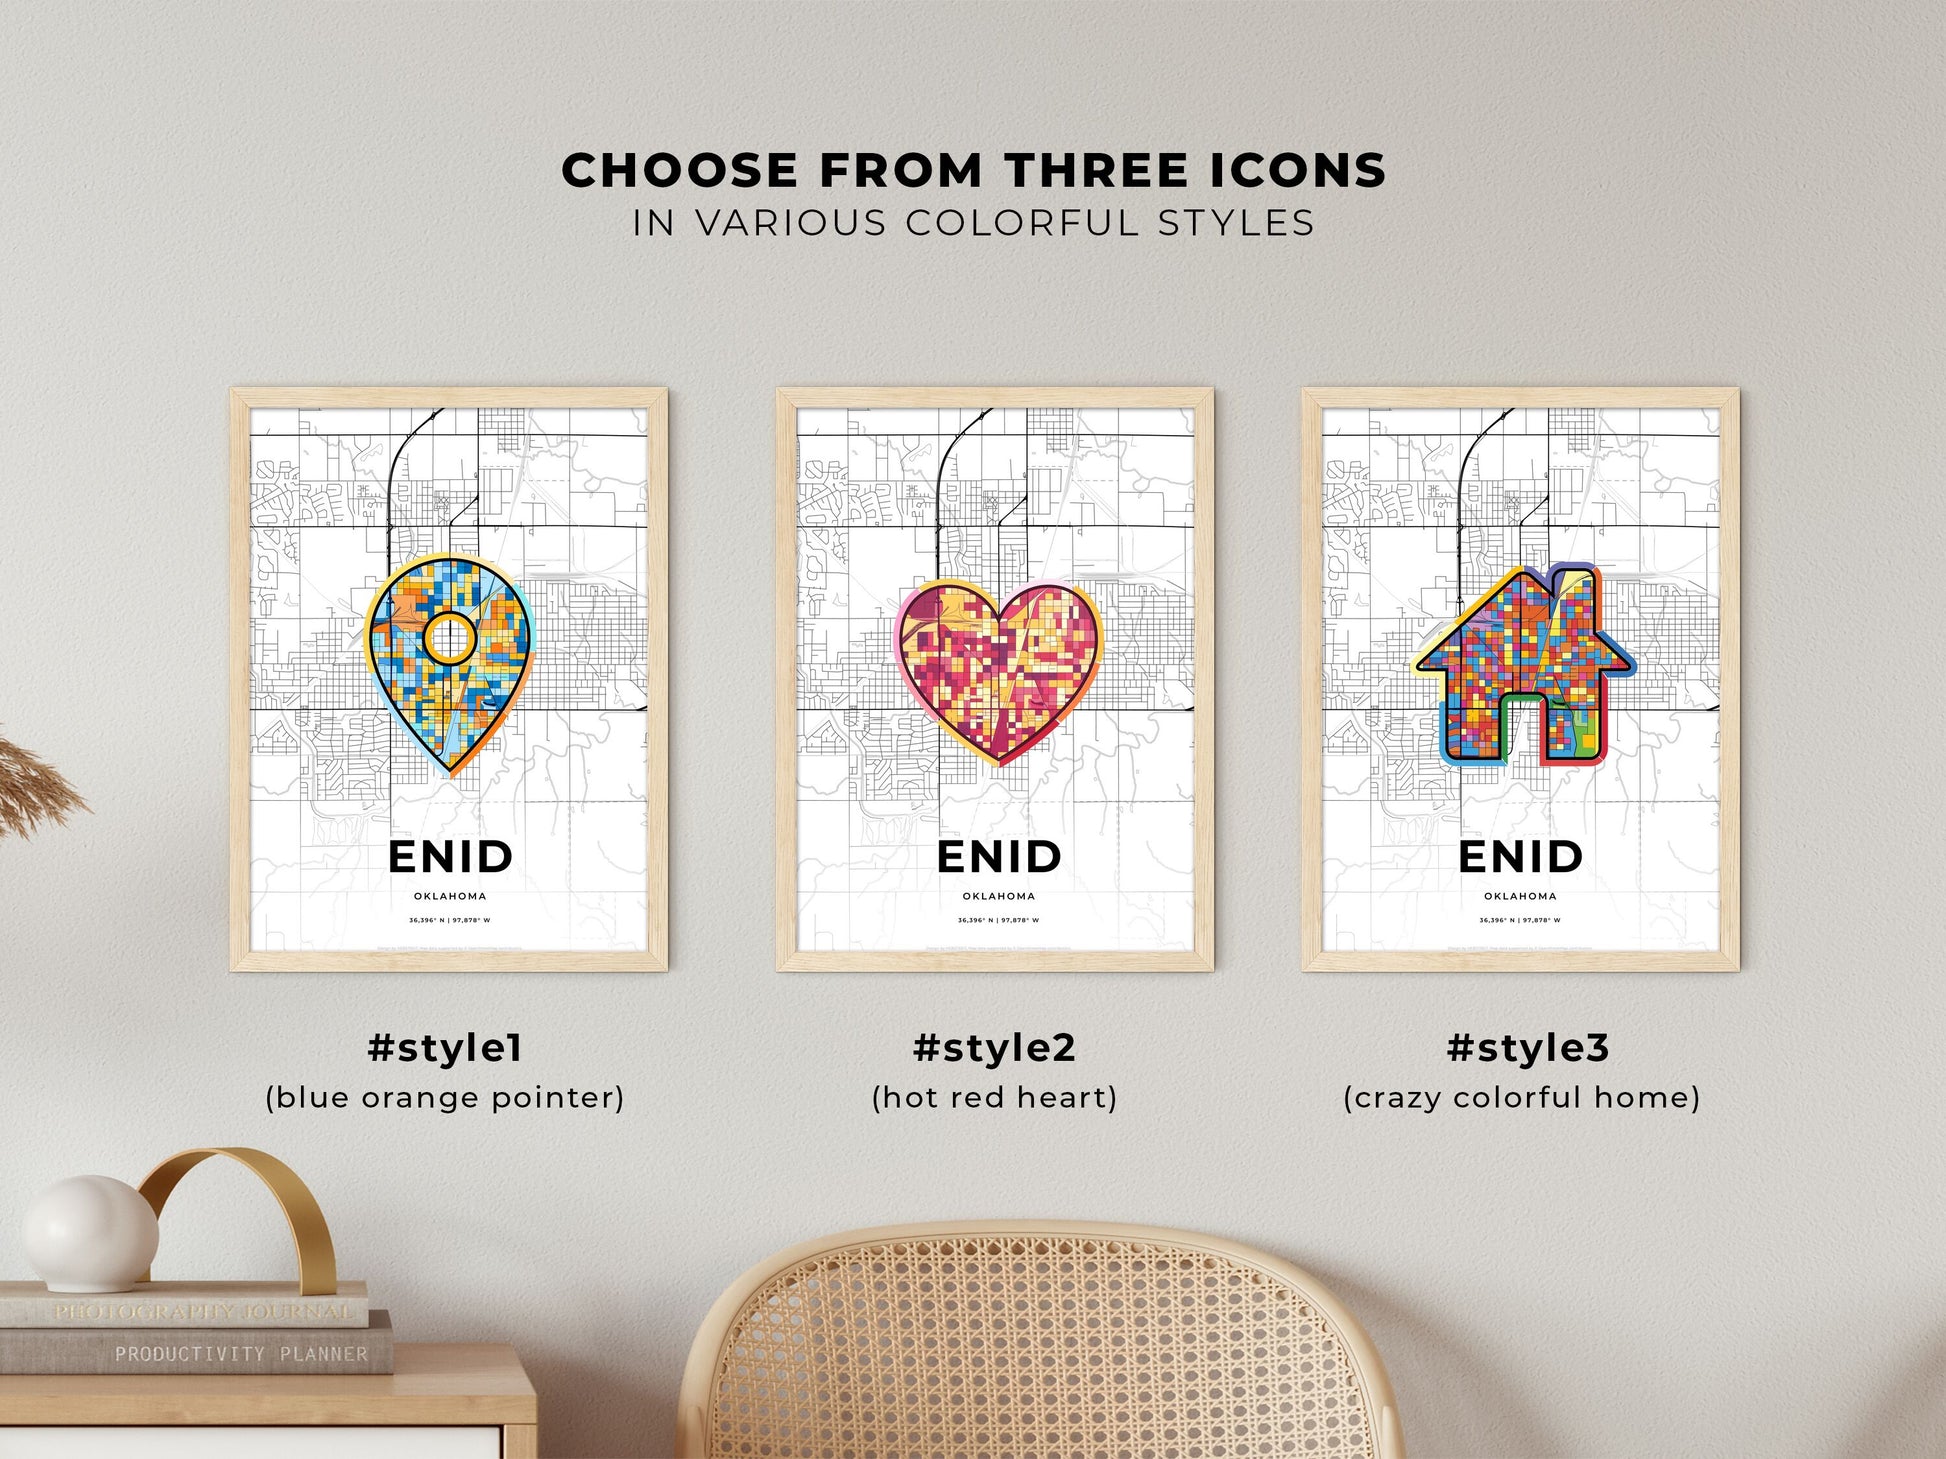 ENID OKLAHOMA minimal art map with a colorful icon. Where it all began, Couple map gift.